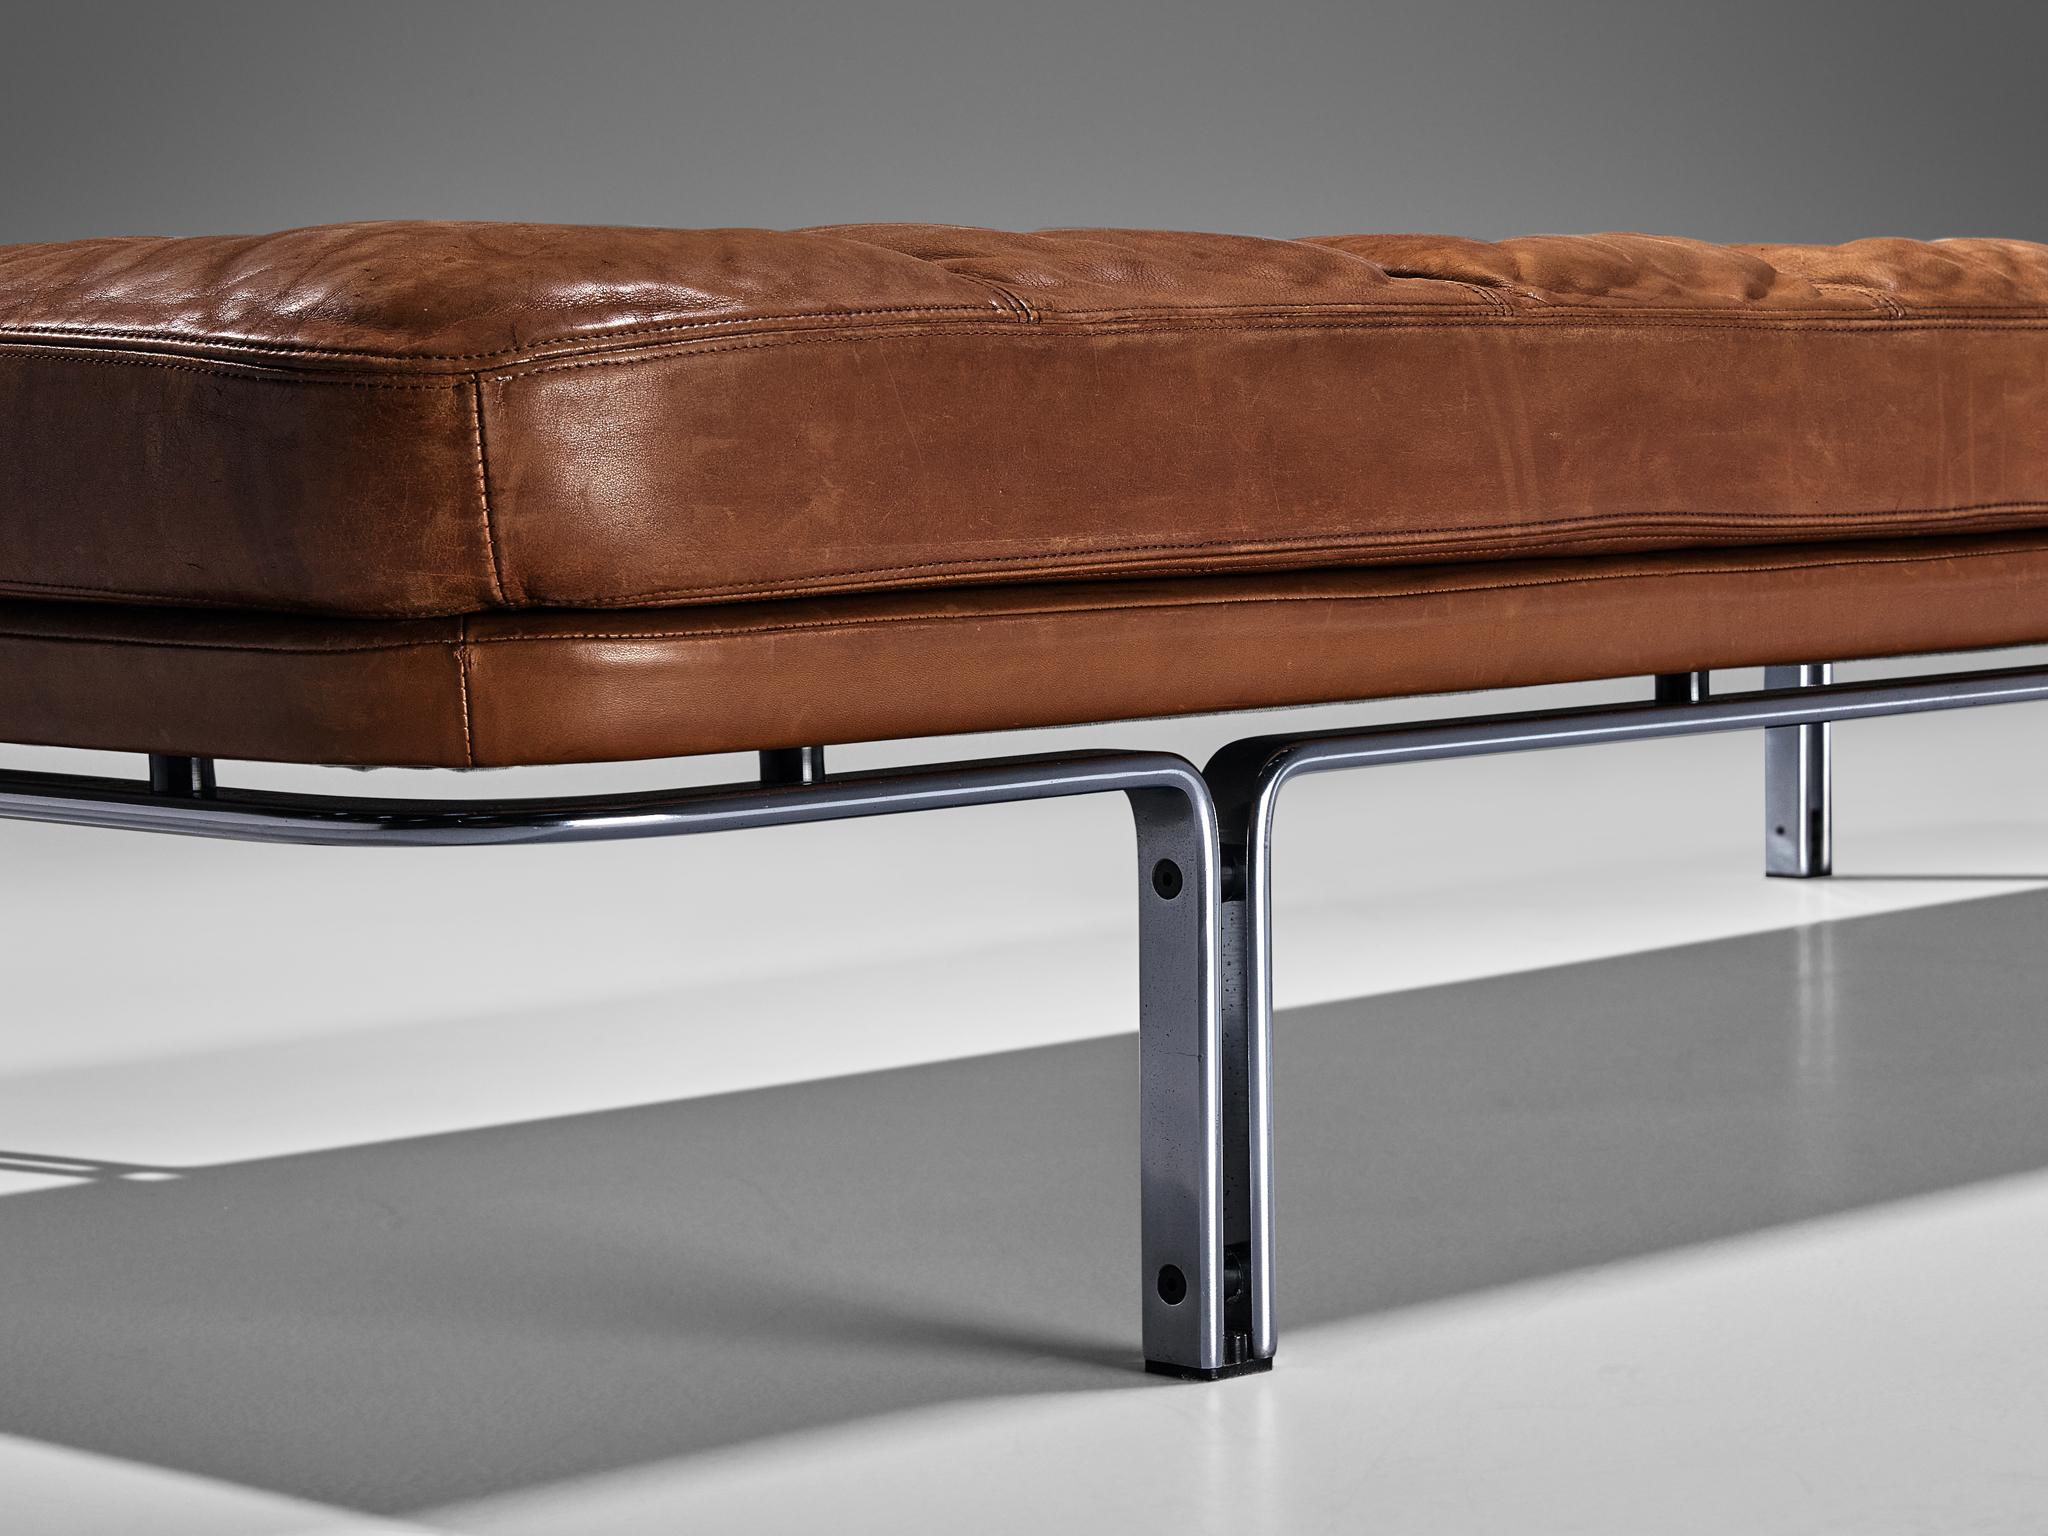 German Horst Brüning Daybed in Original Brown Leather and Chrome